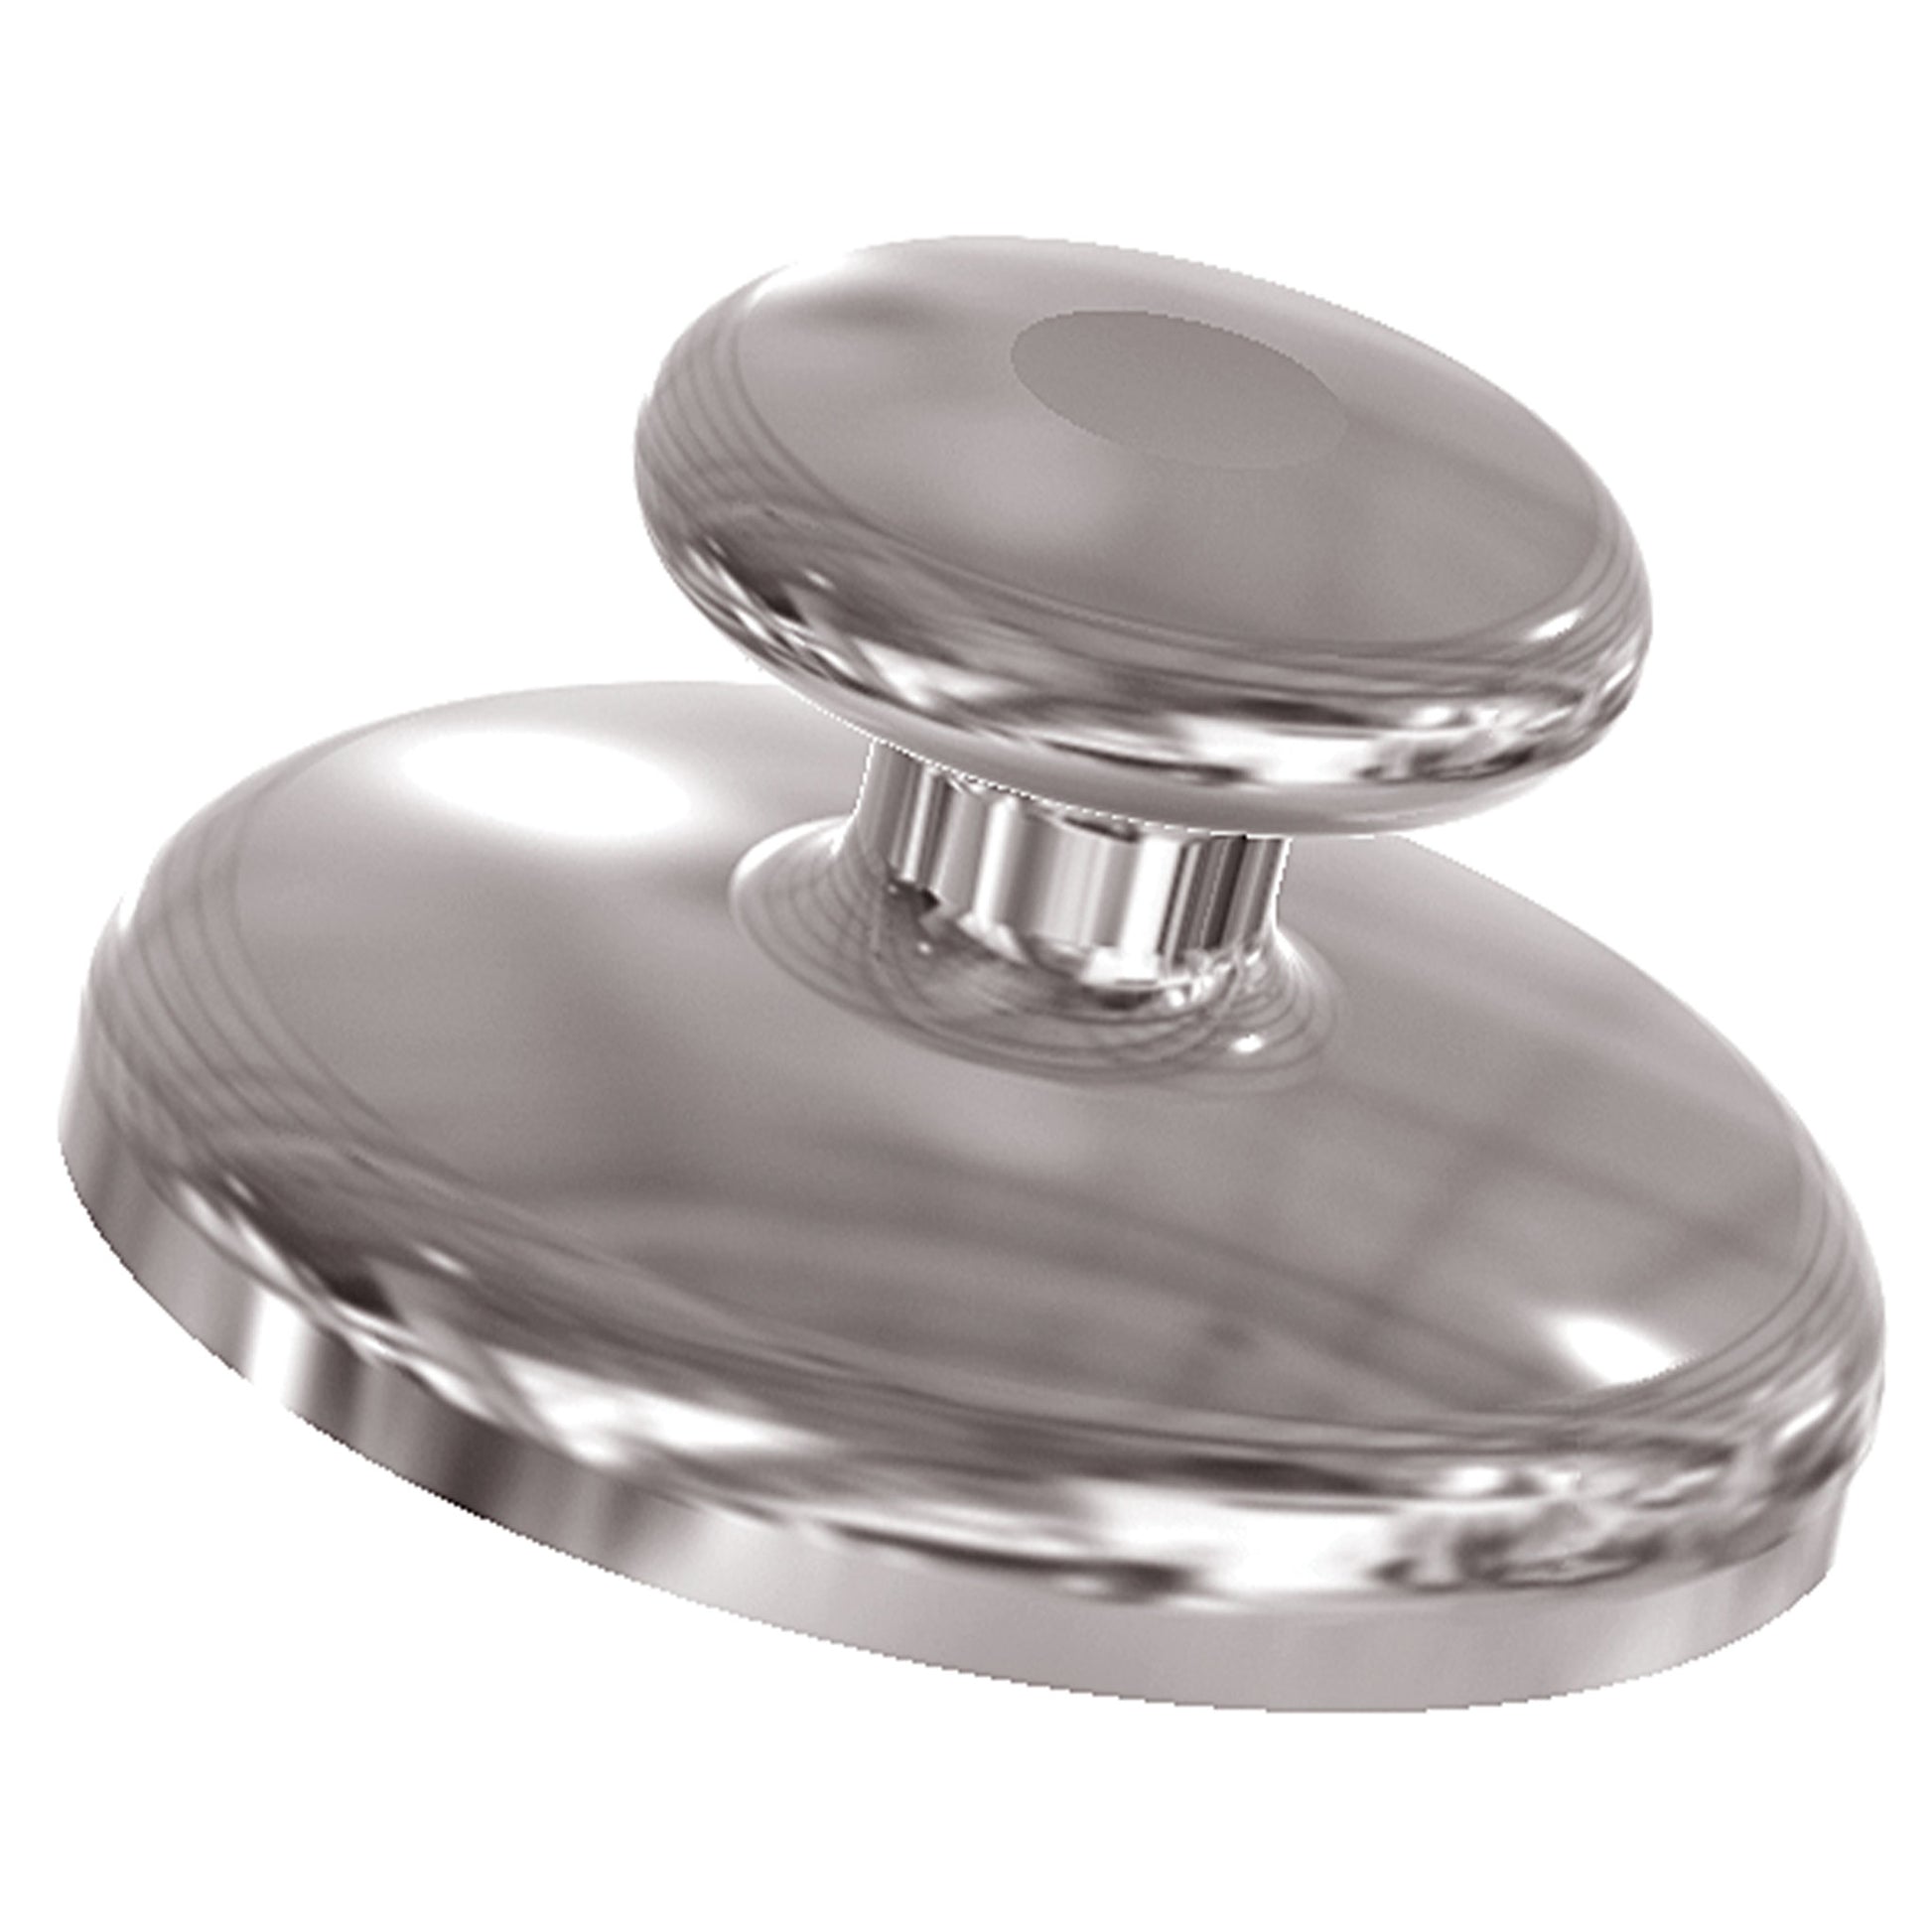 Orthodontic Bondable Buttons Curved Round Base Stainless Steel